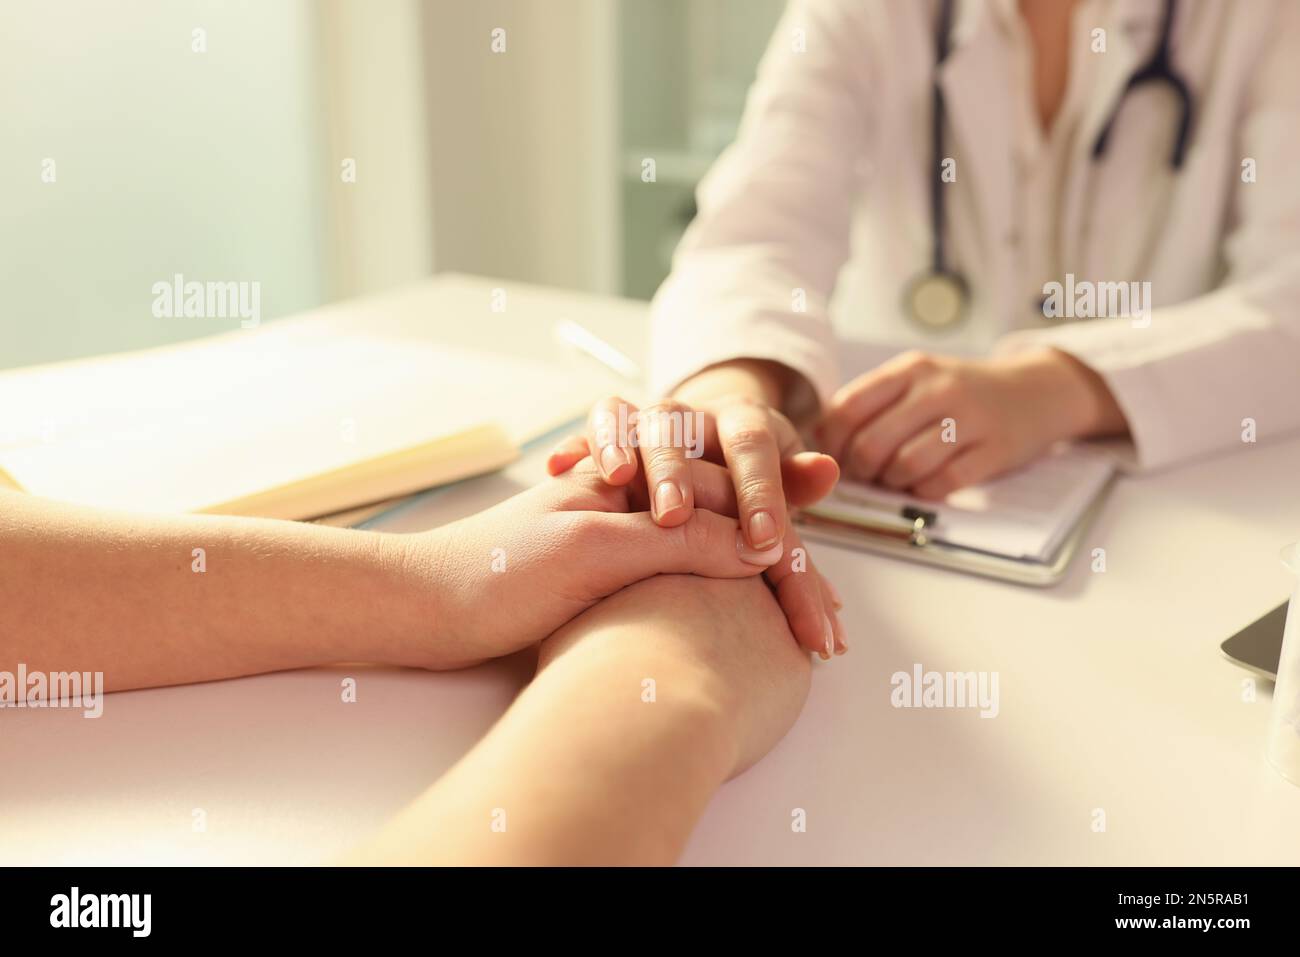 Female doctor puts her hand on hands of woman patient while explaining diagnosis. Stock Photo